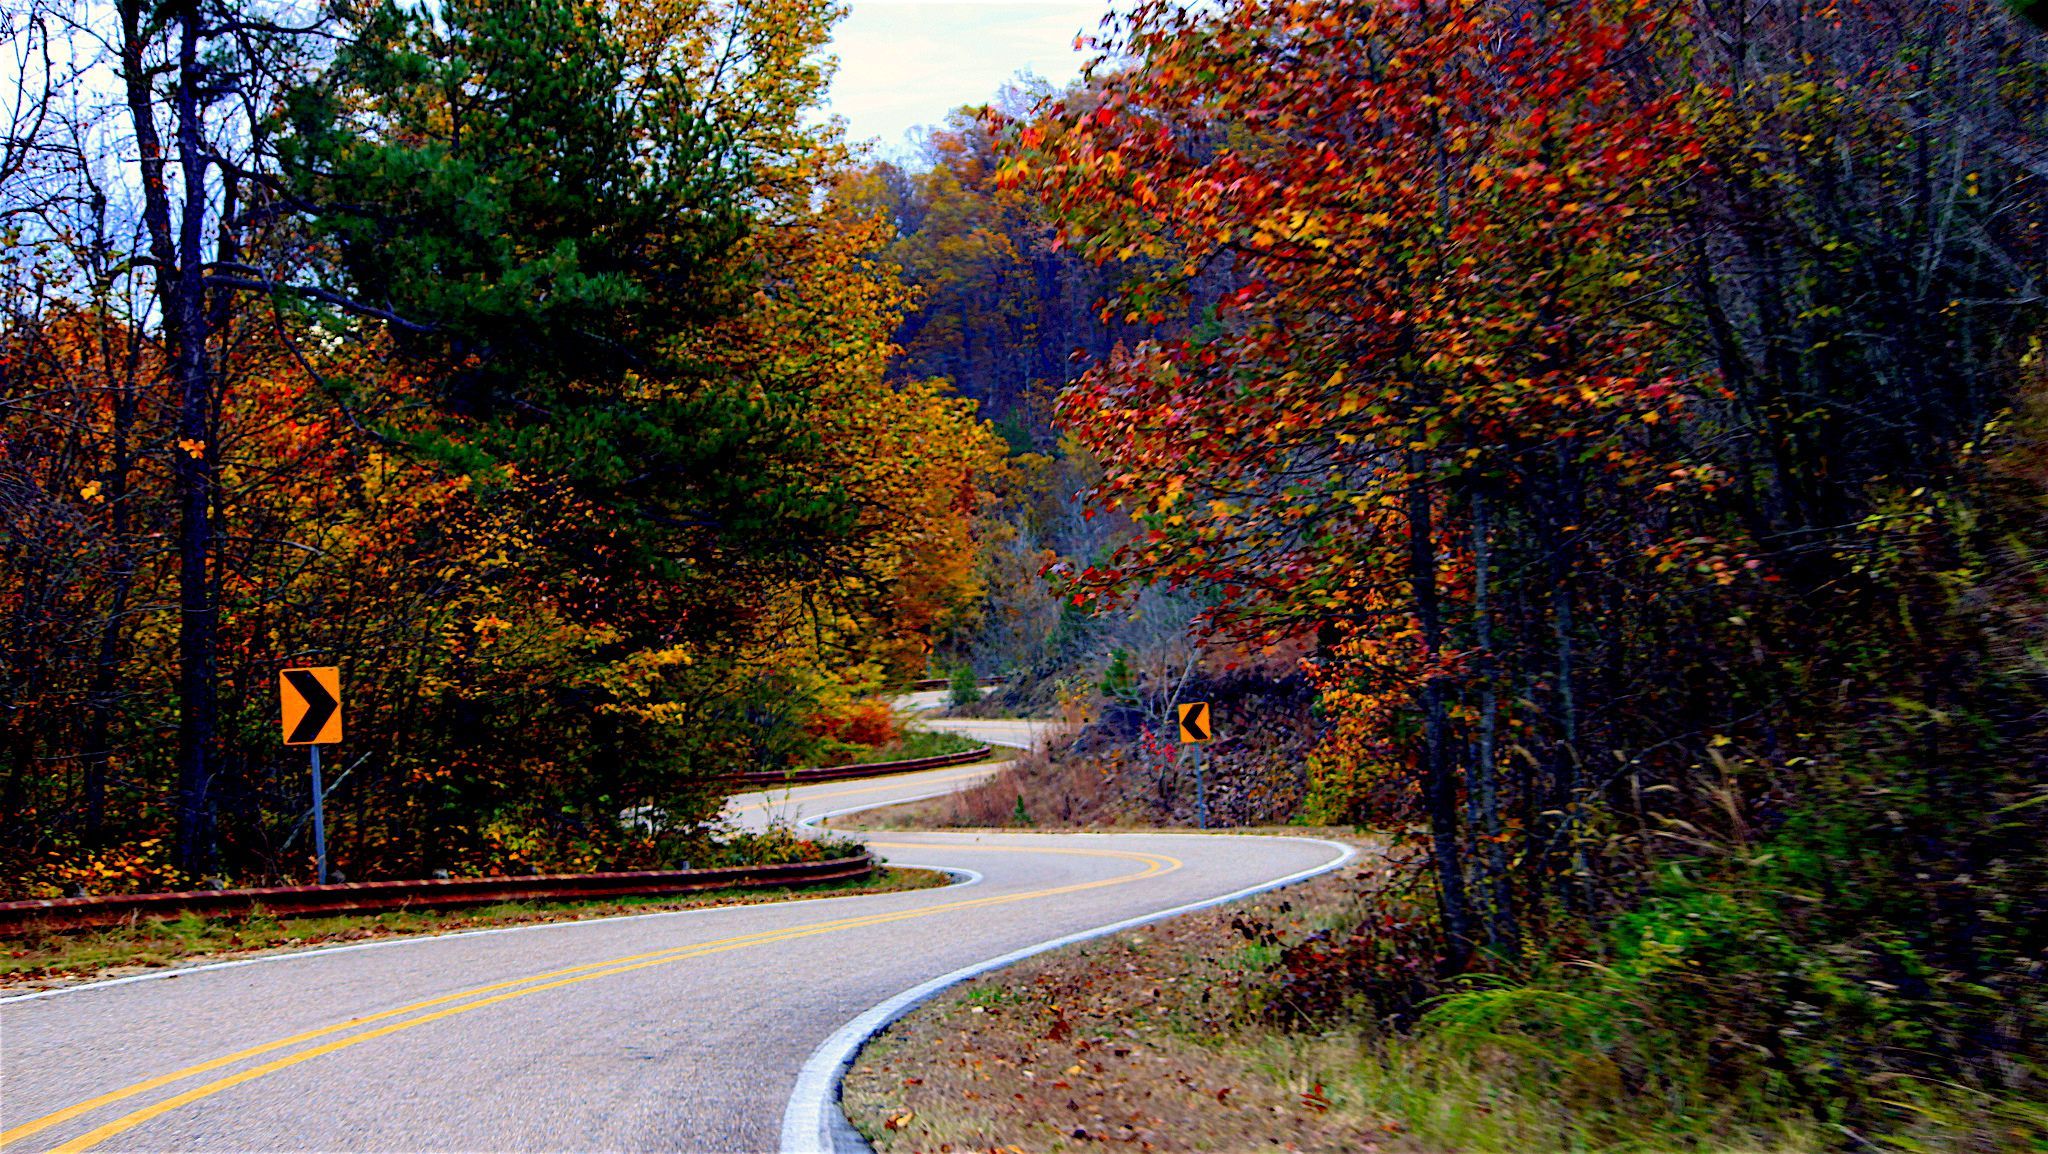 Twisty Talimena National Scenic Byway – Scenic Motorcycle Roads